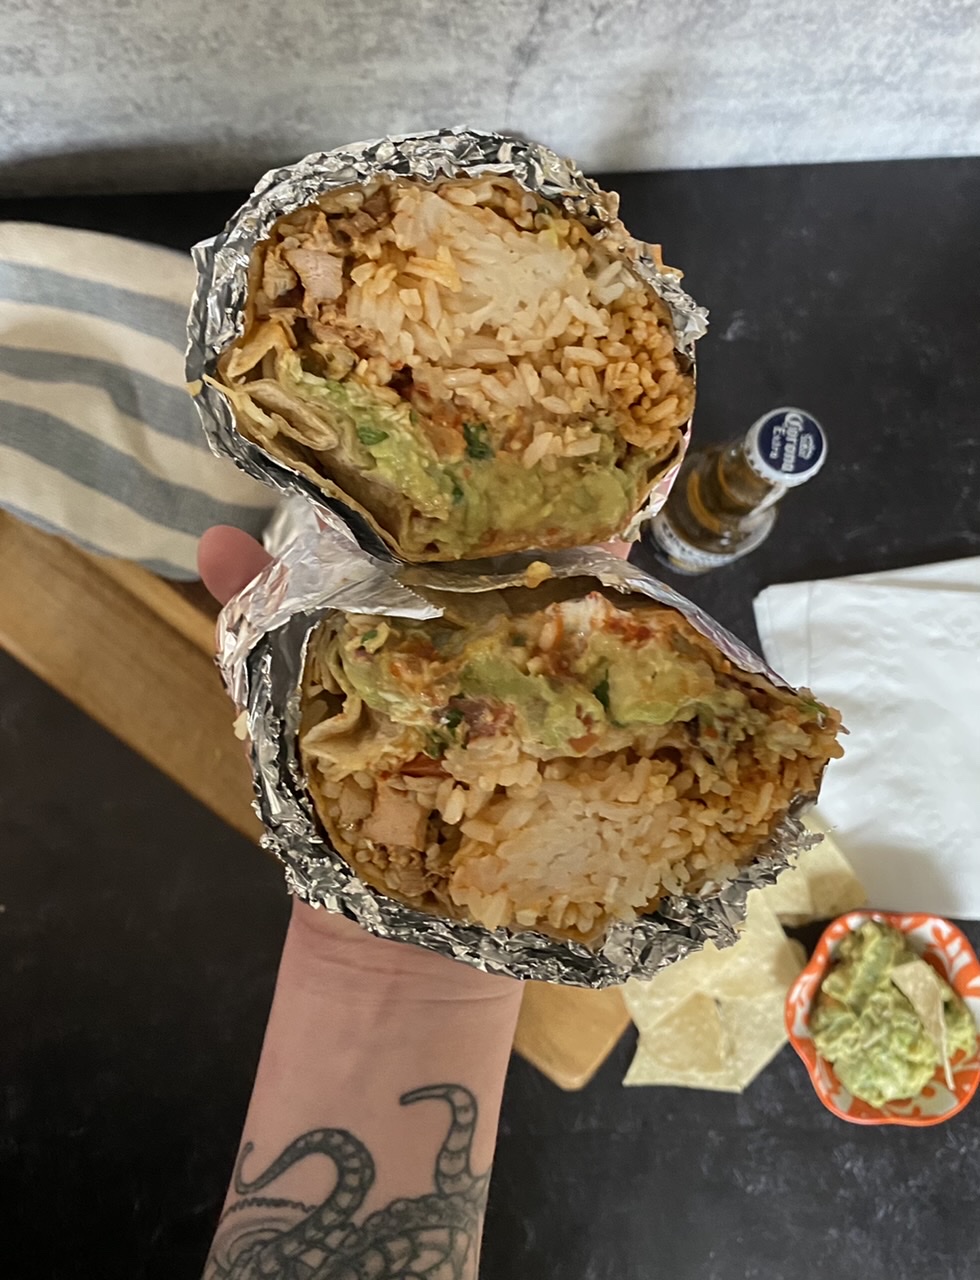 Two chicken burritos above a wood cutting board with a corona being held by a person with a tattoo